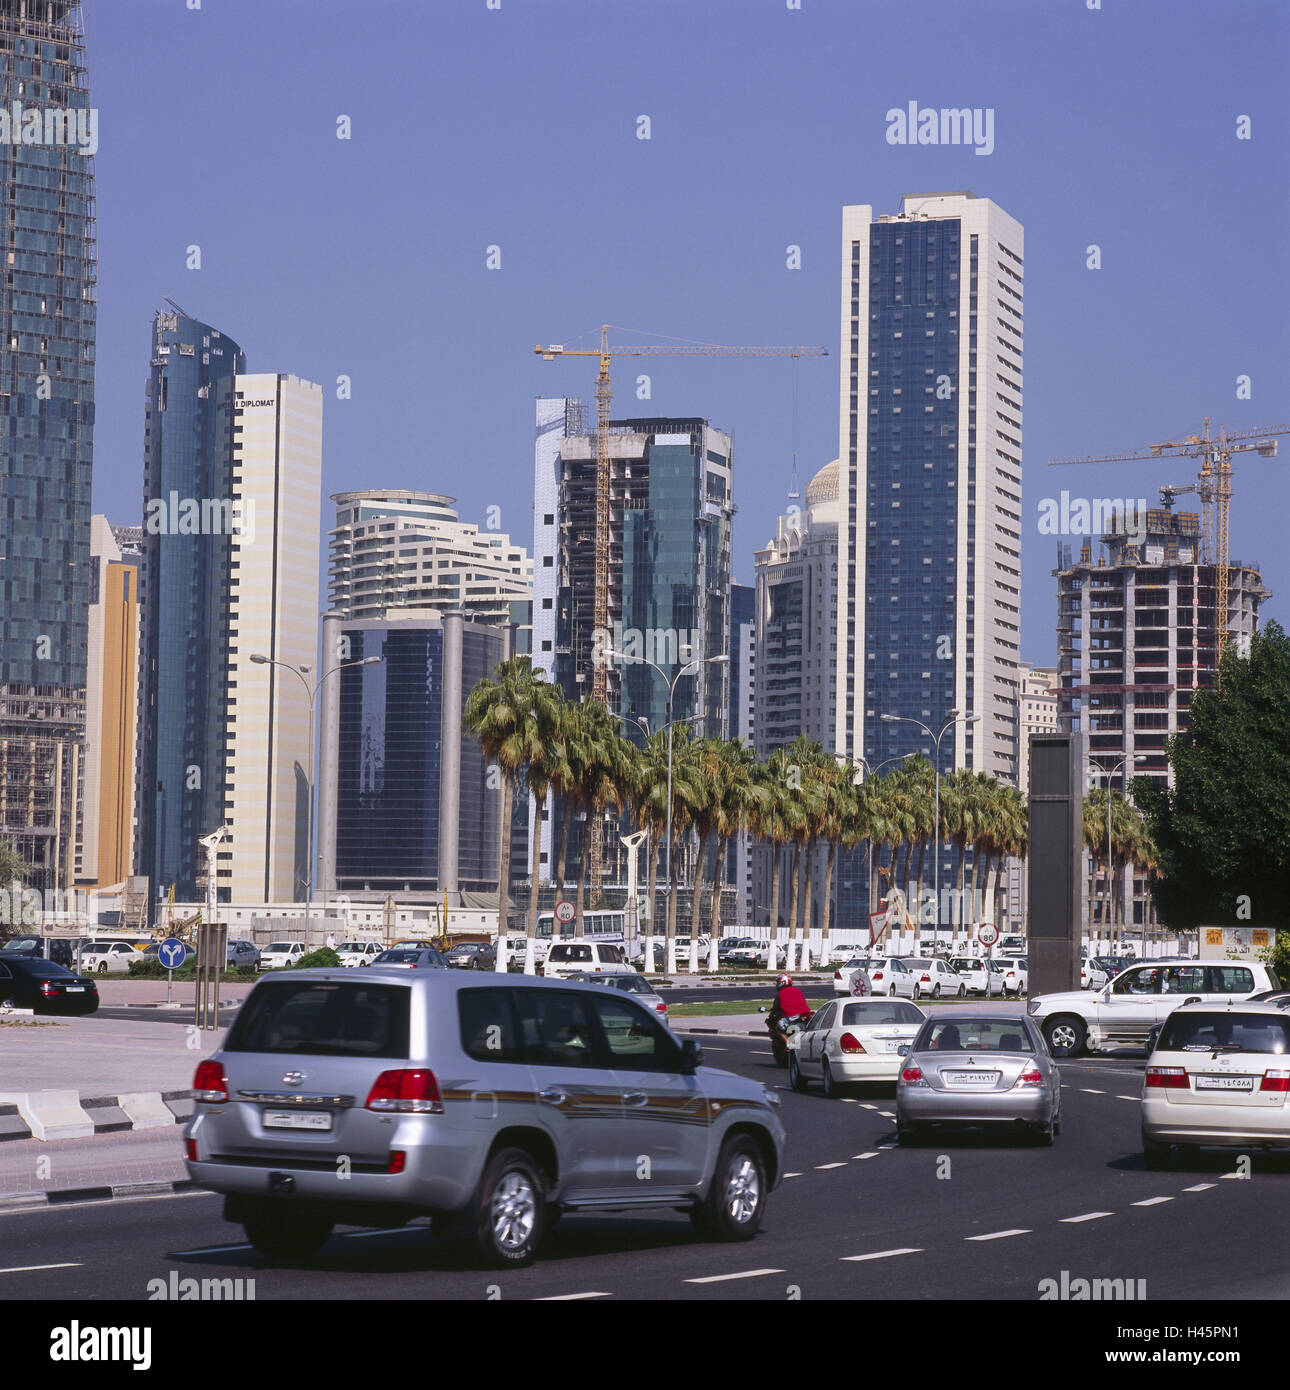 Qatar, Doha, high rises, traffic, cars, sheikdom, town, capital, destination, place of interest, culture, building, architecture, office building, street, traffic, cranes, palms, Stock Photo